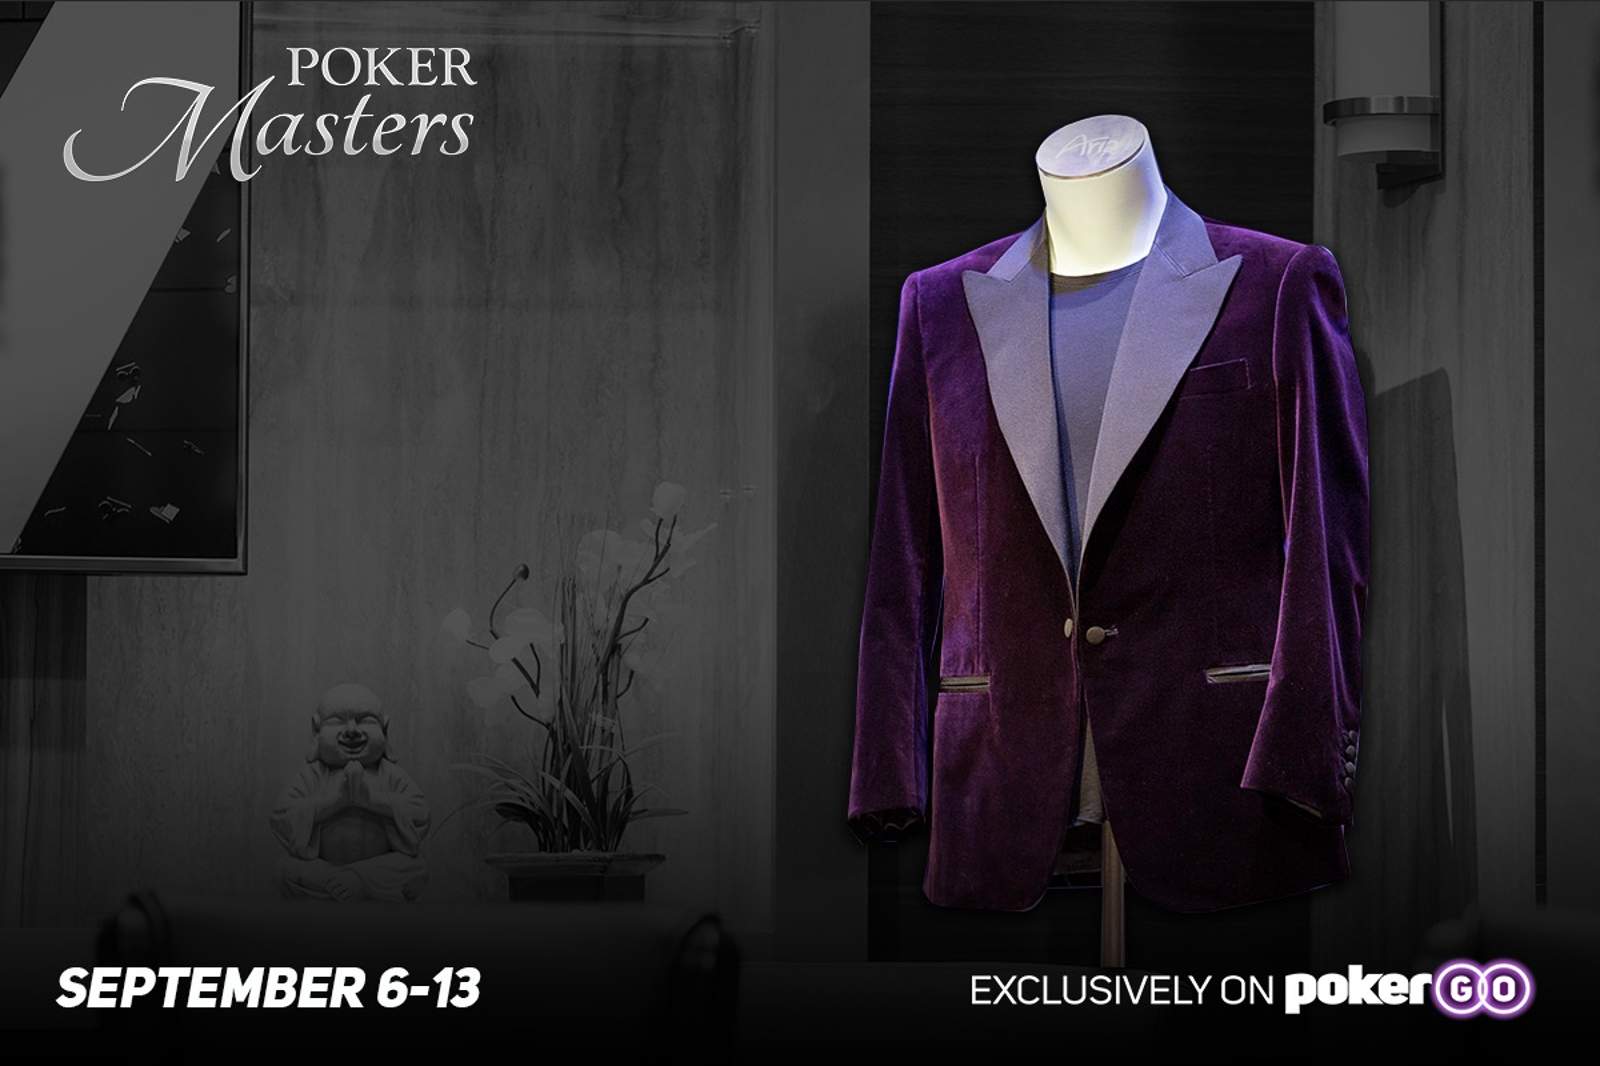 2018 Poker Masters Schedule Announced